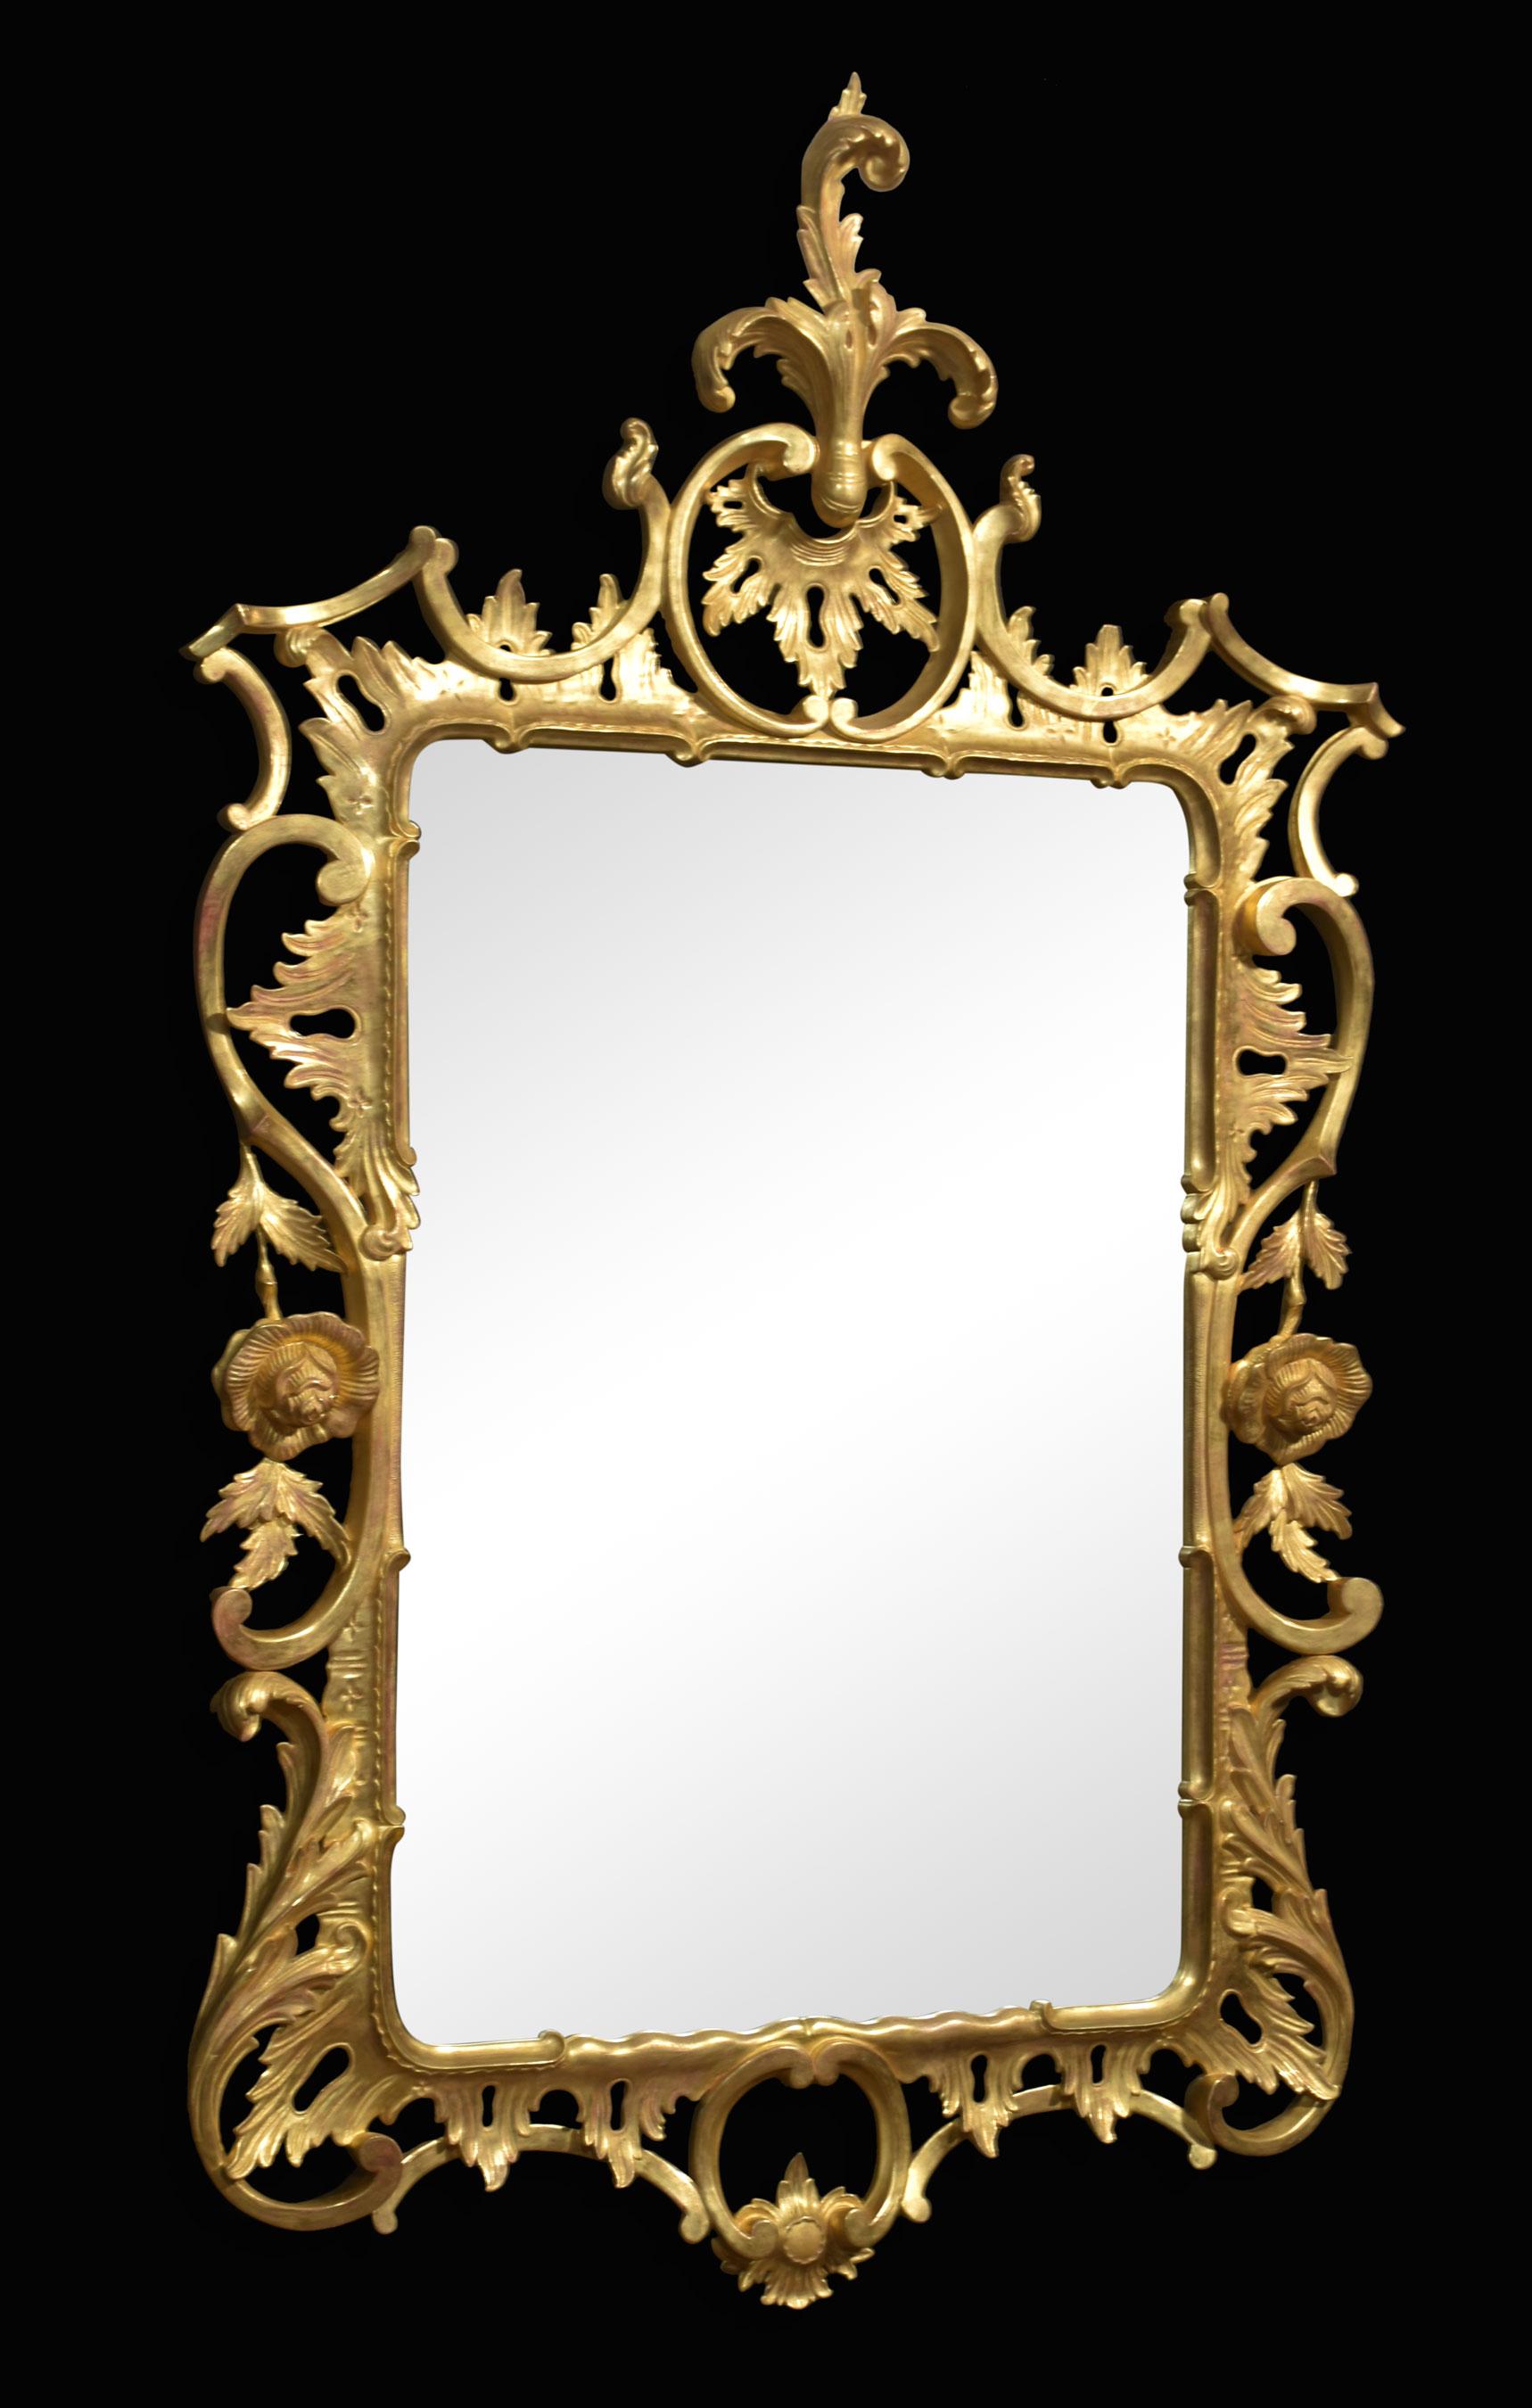 Giltwood Rococo revival giltwood wall mirror For Sale